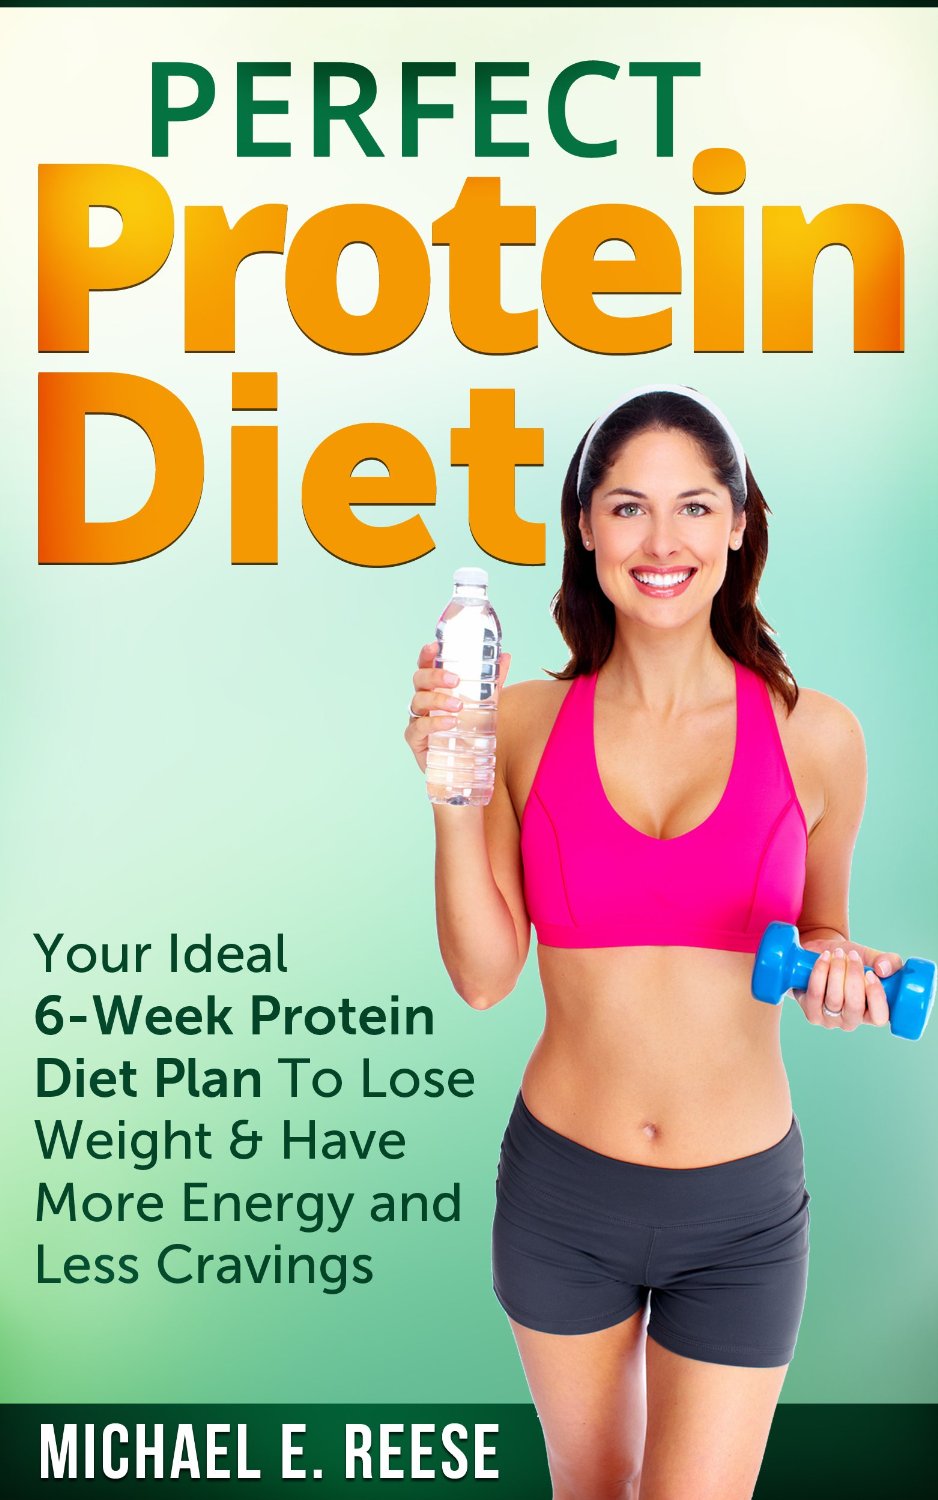 Perfect Protein Diet: Your Ideal 6-Week Protein Diet Plan To Lose Weight & Have More Energy and Less Cravings by Michael E. Reese